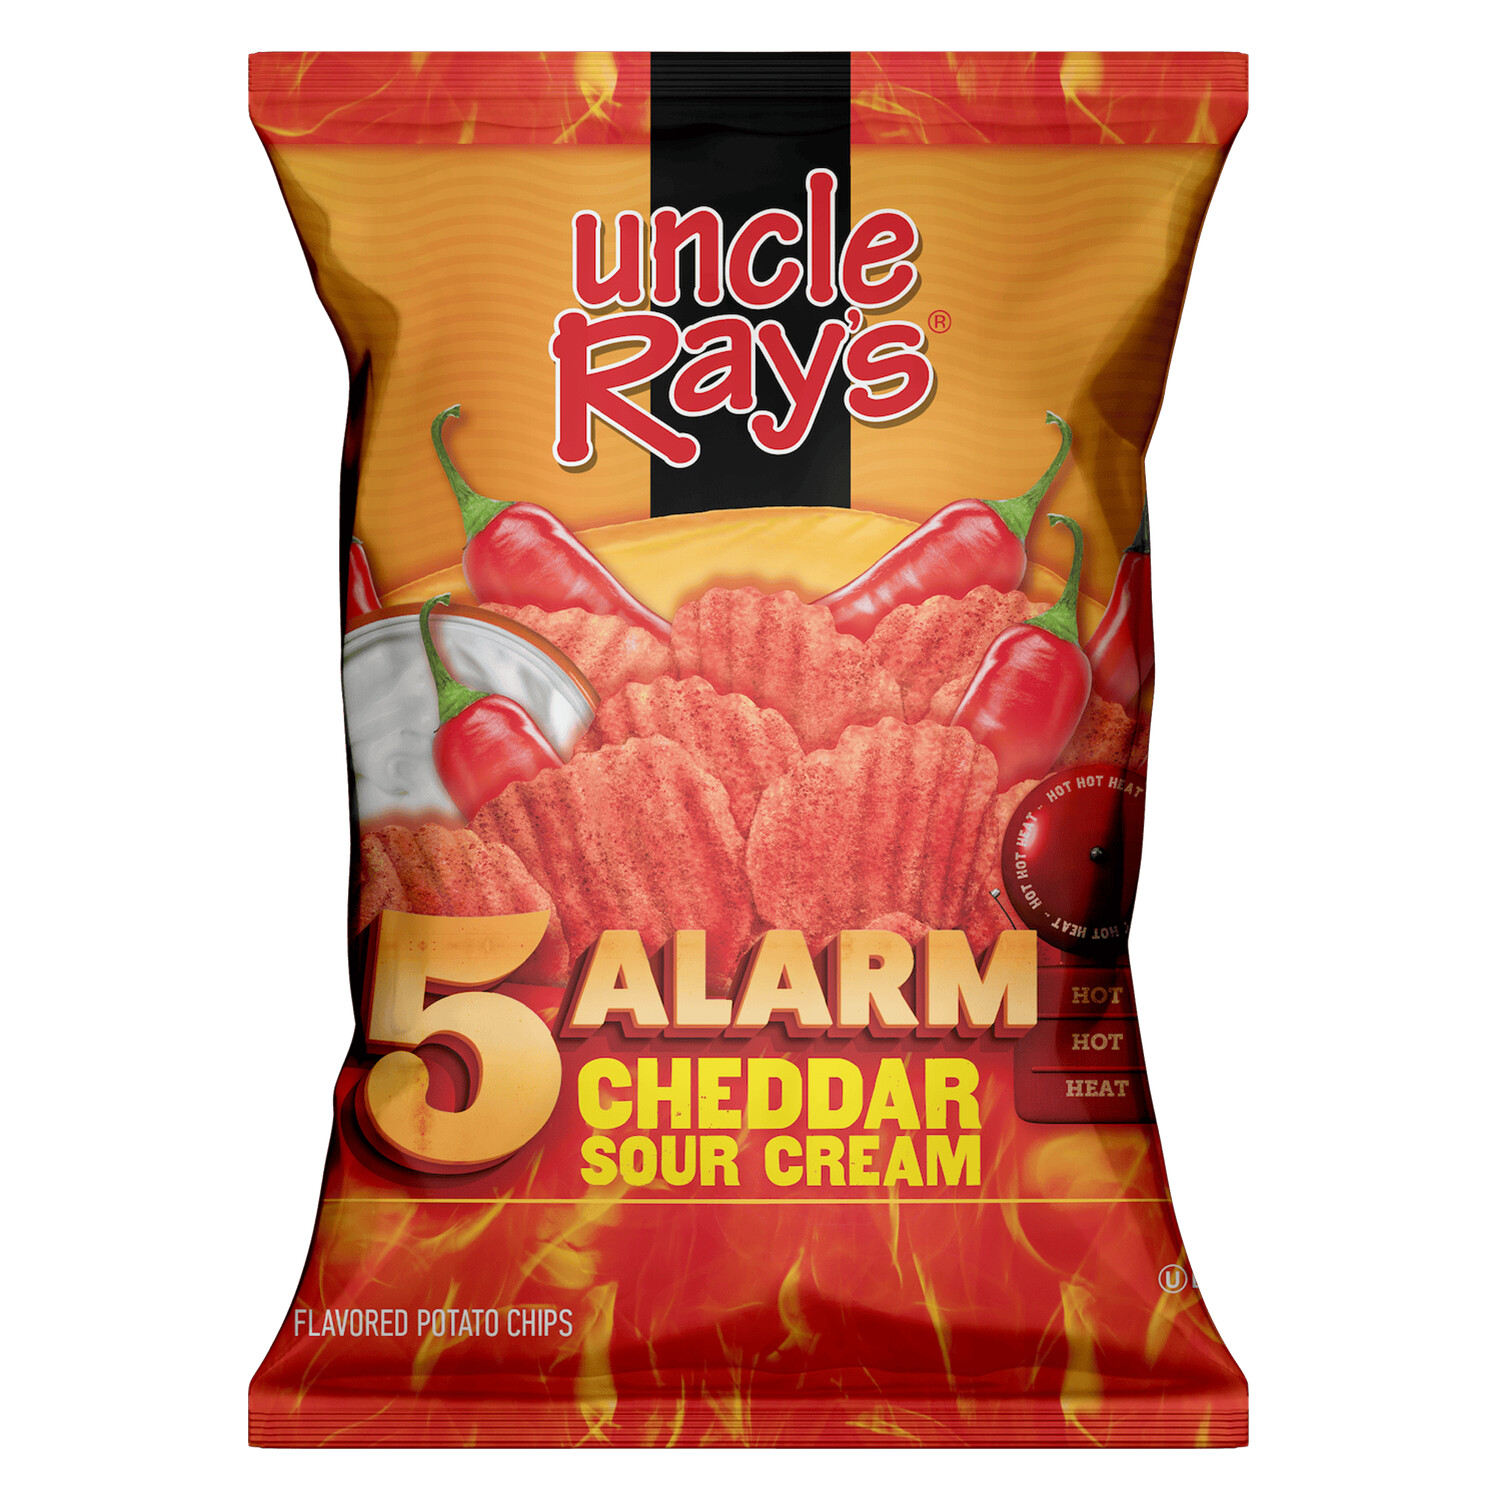 Uncle Ray's 5 Alarm Cheddar Sour Cream